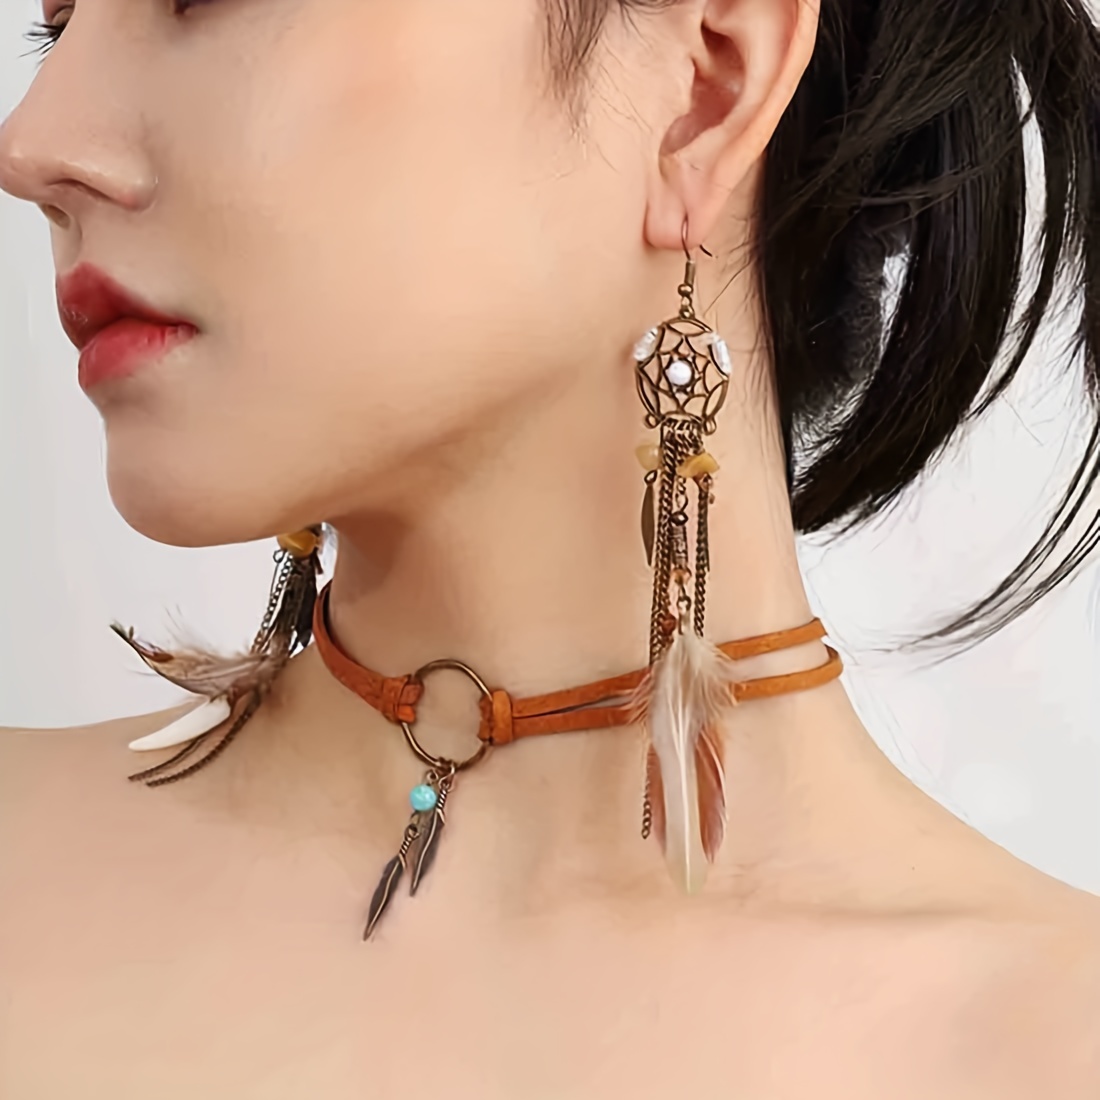 

3pcs Earrings + Choker Tribal Jewelry Set Special Dream Catching & Feather Design Match Daily Outfits Party Accessories